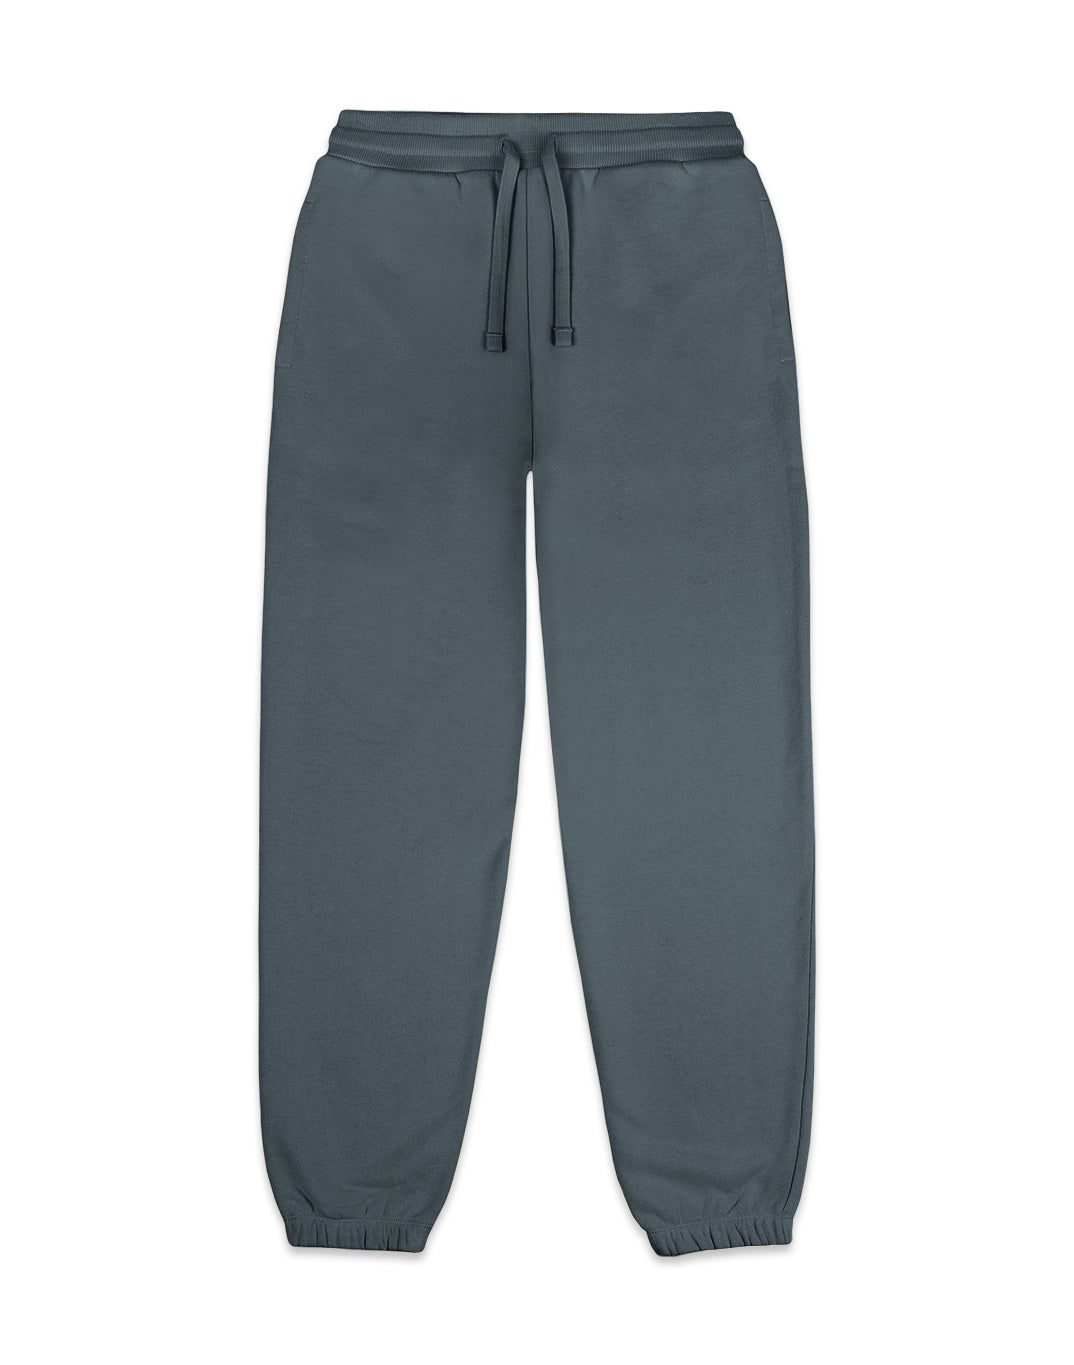 The Jogger in Slate Grey